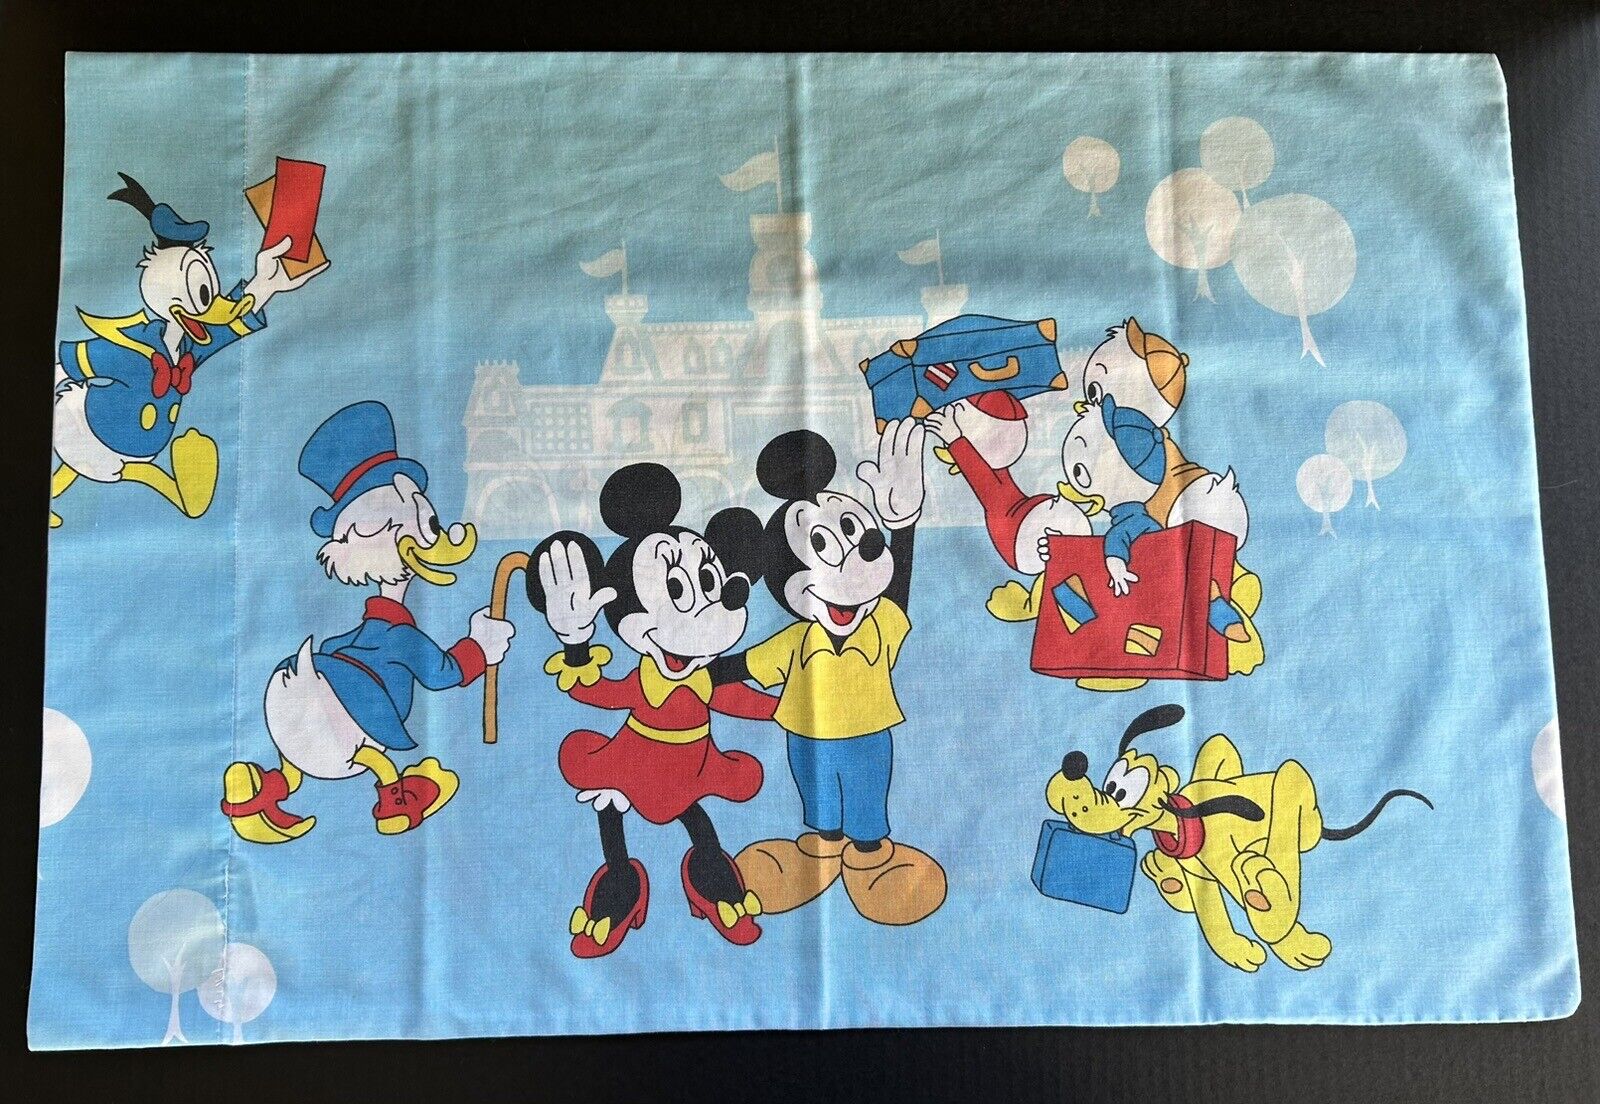 Vintage 1970’s Disney Pillowcase Frontierland Mickey Mouse Minnie